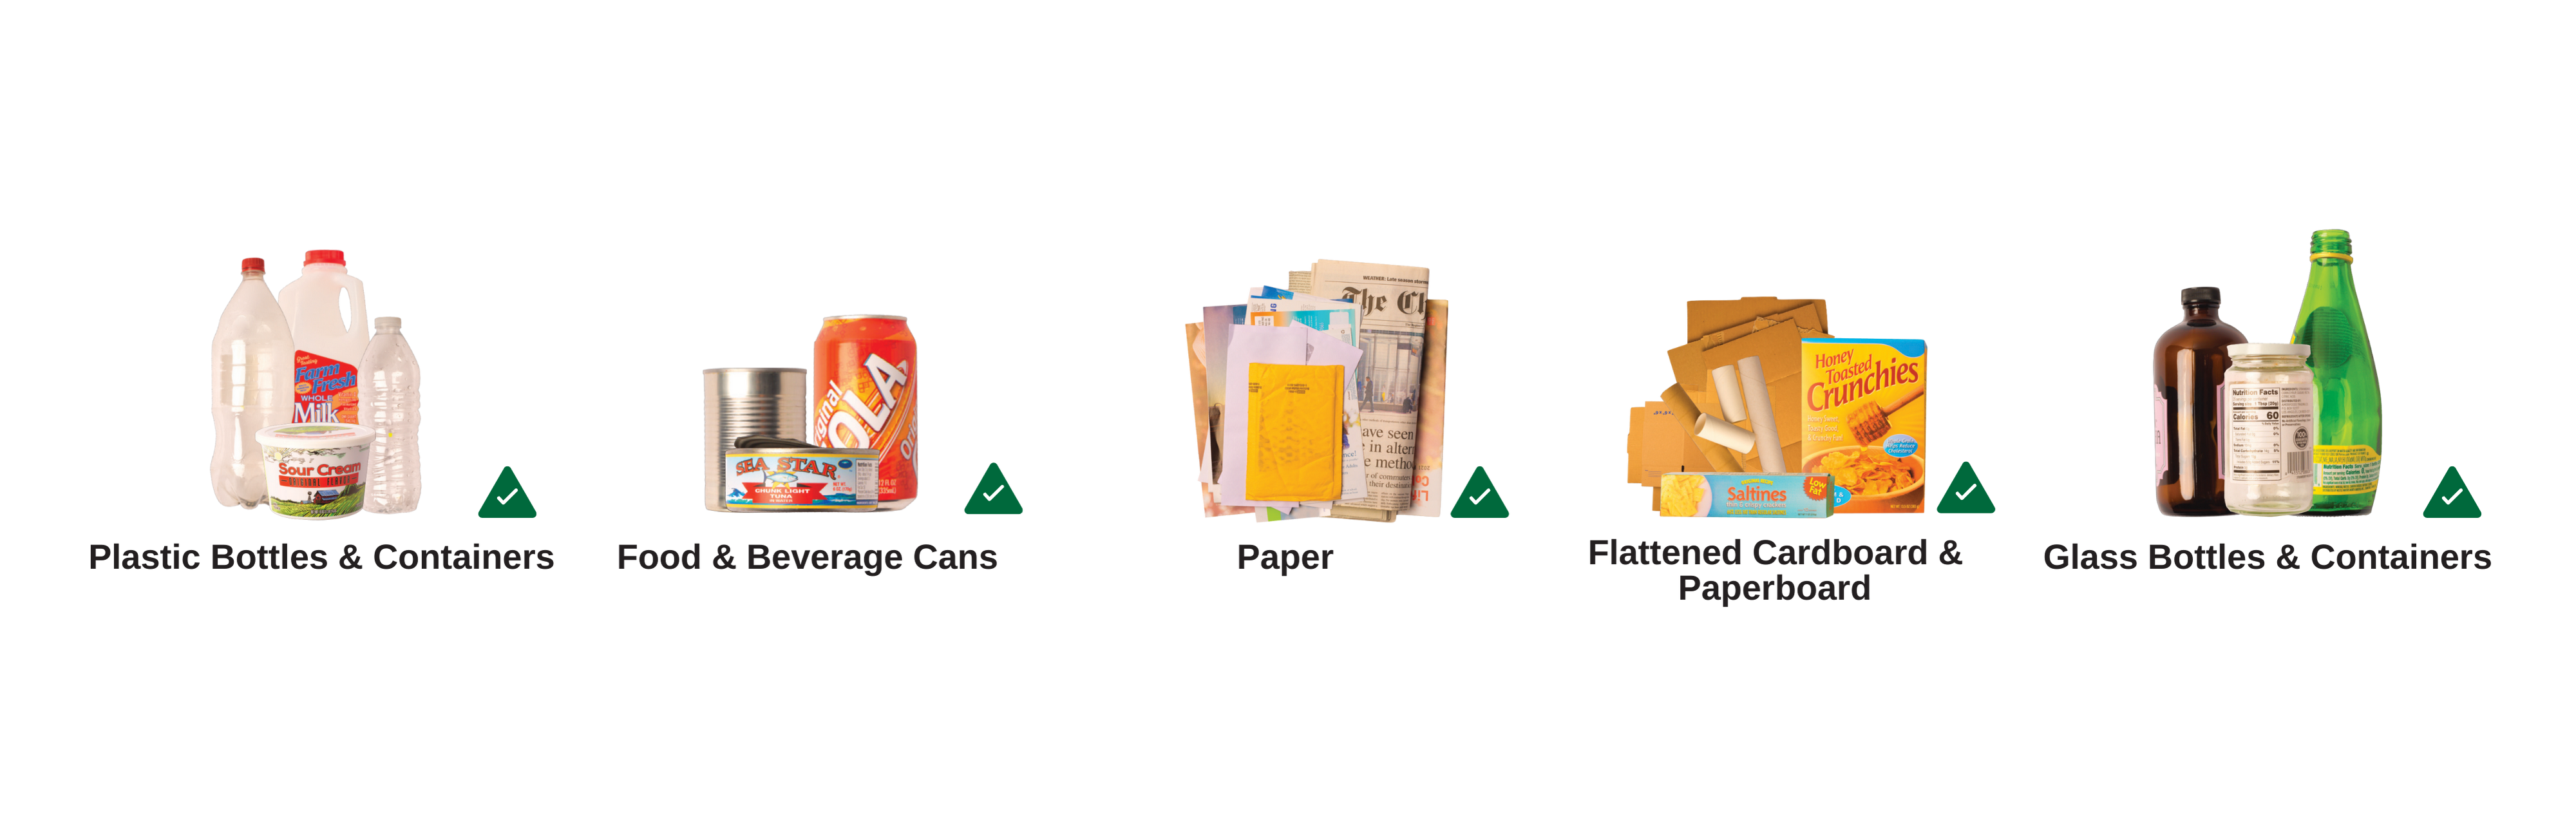 Example of recycling images, in order from left to right: plastic bottles & containers, food & beverage cans, paper, flattened cardboard & paperboard, glass bottles & containers 